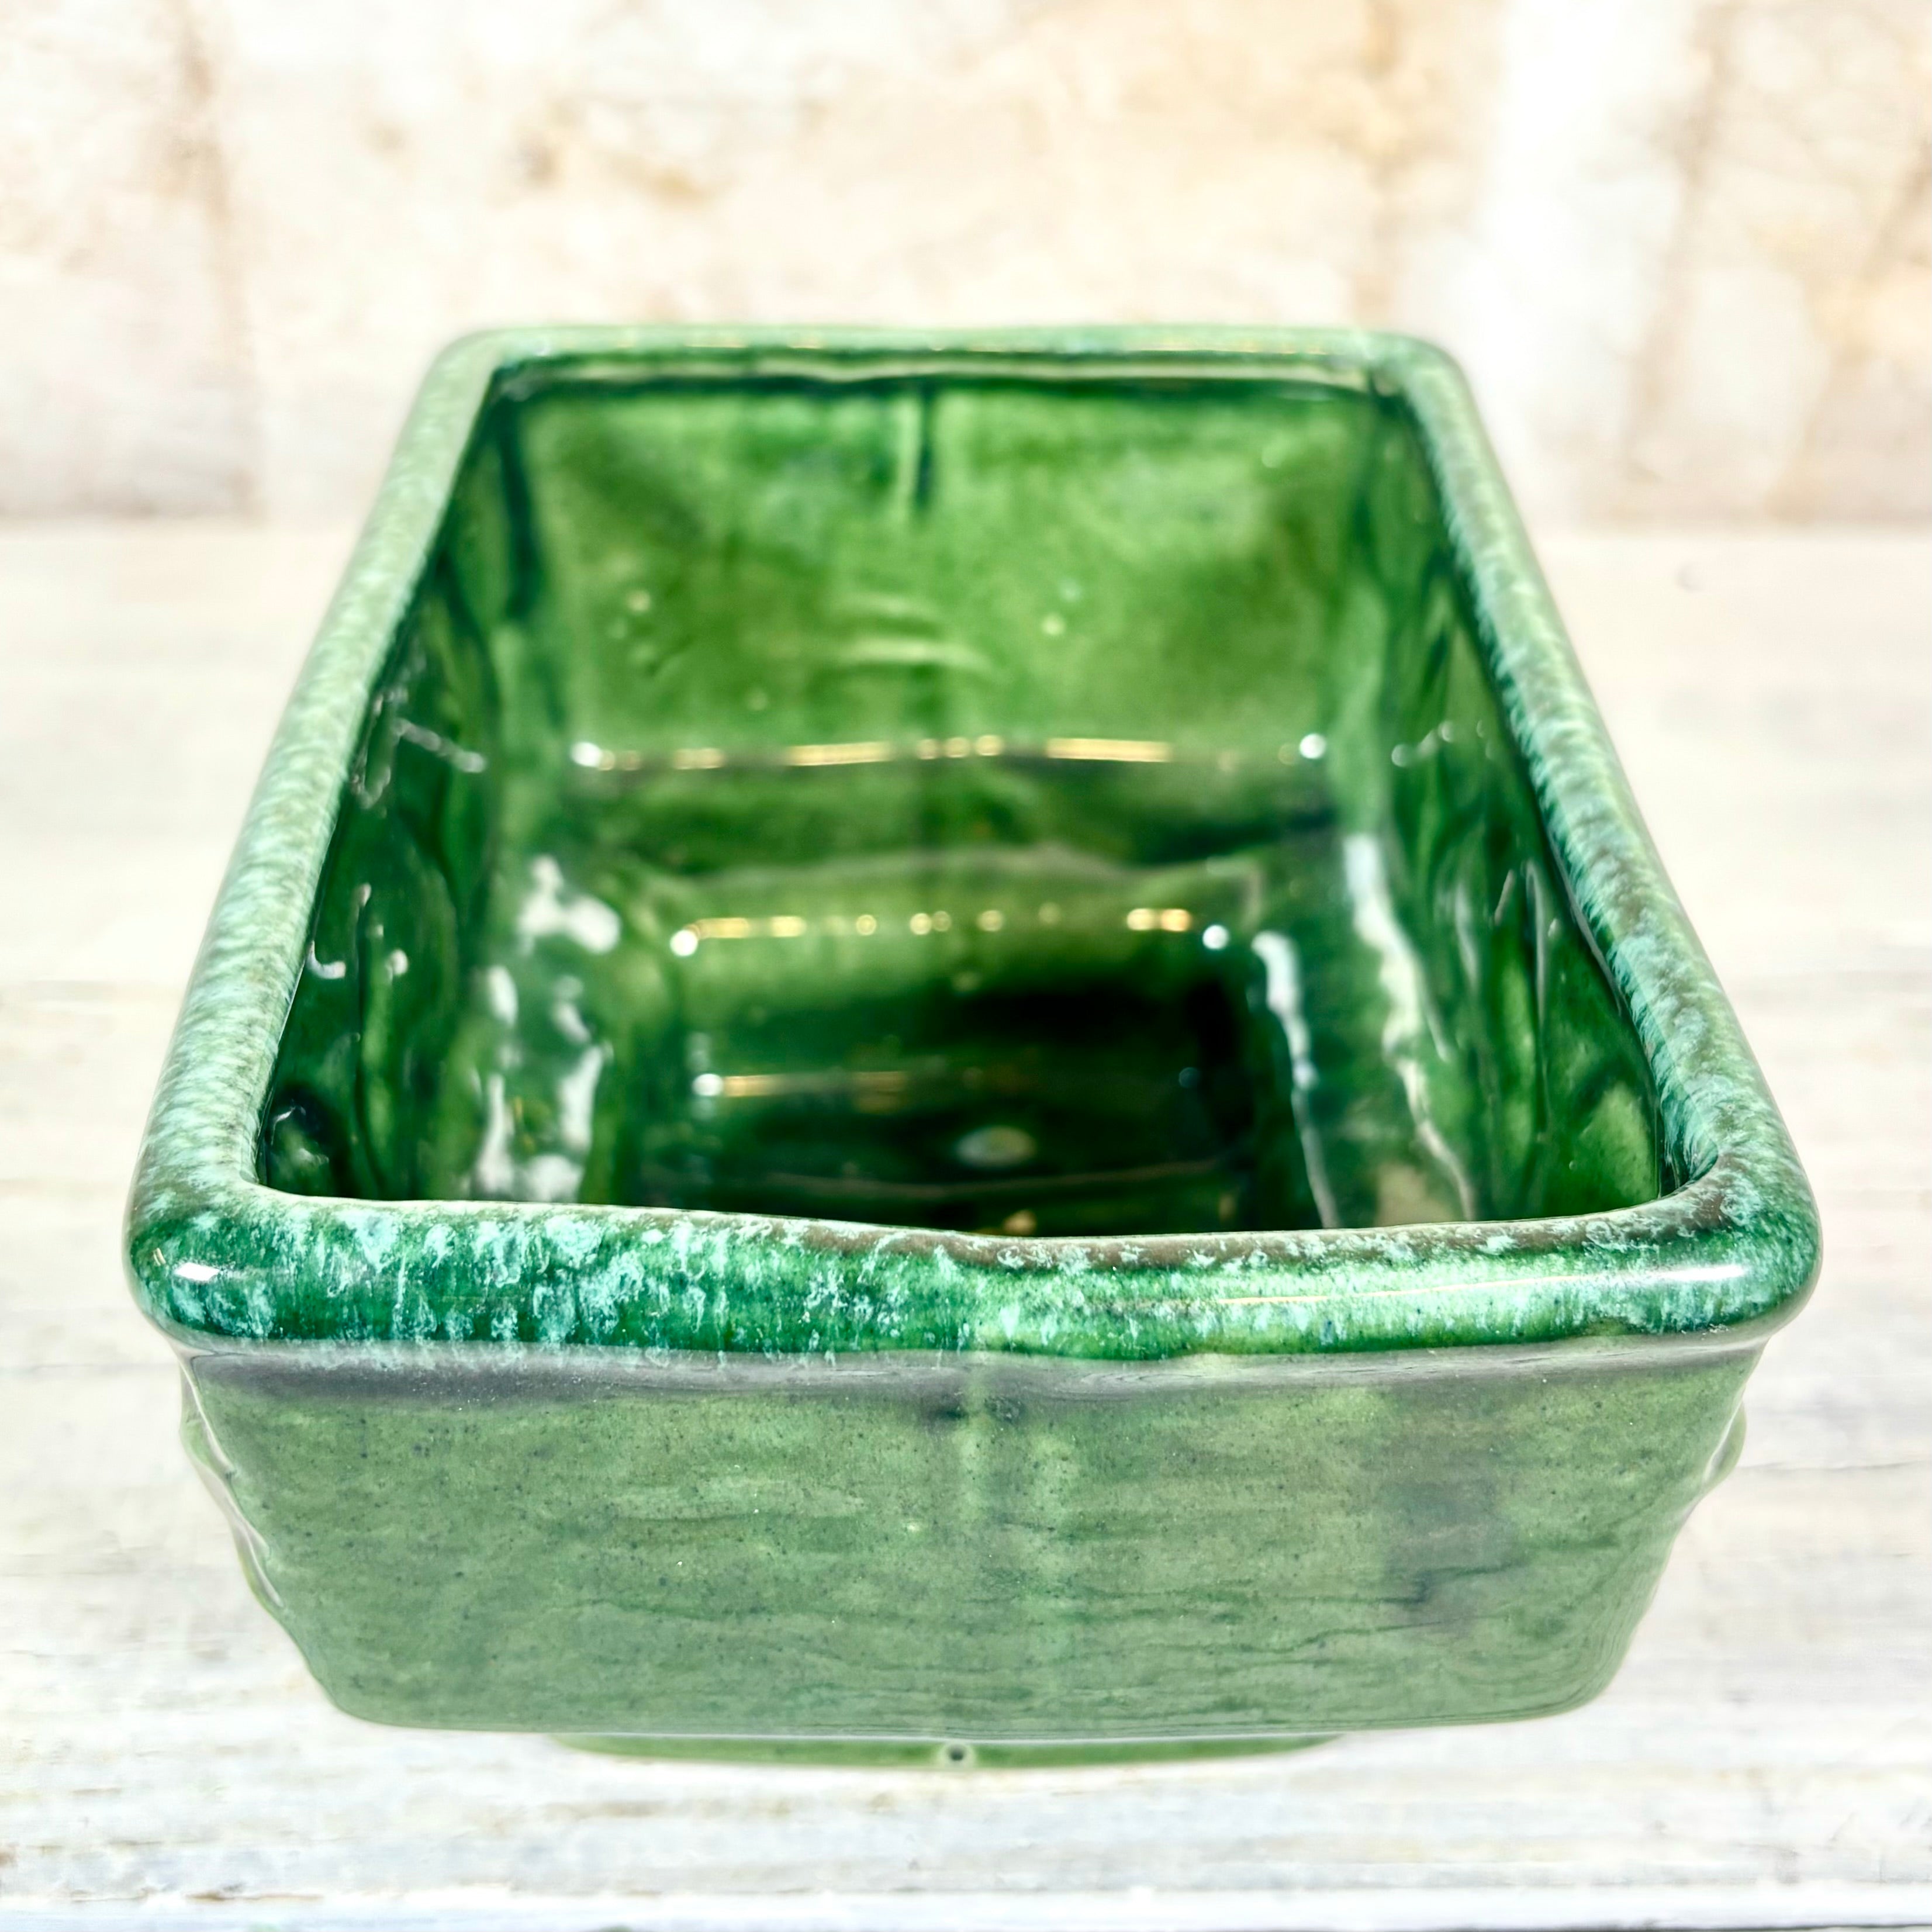 American Bisque Pottery Planter